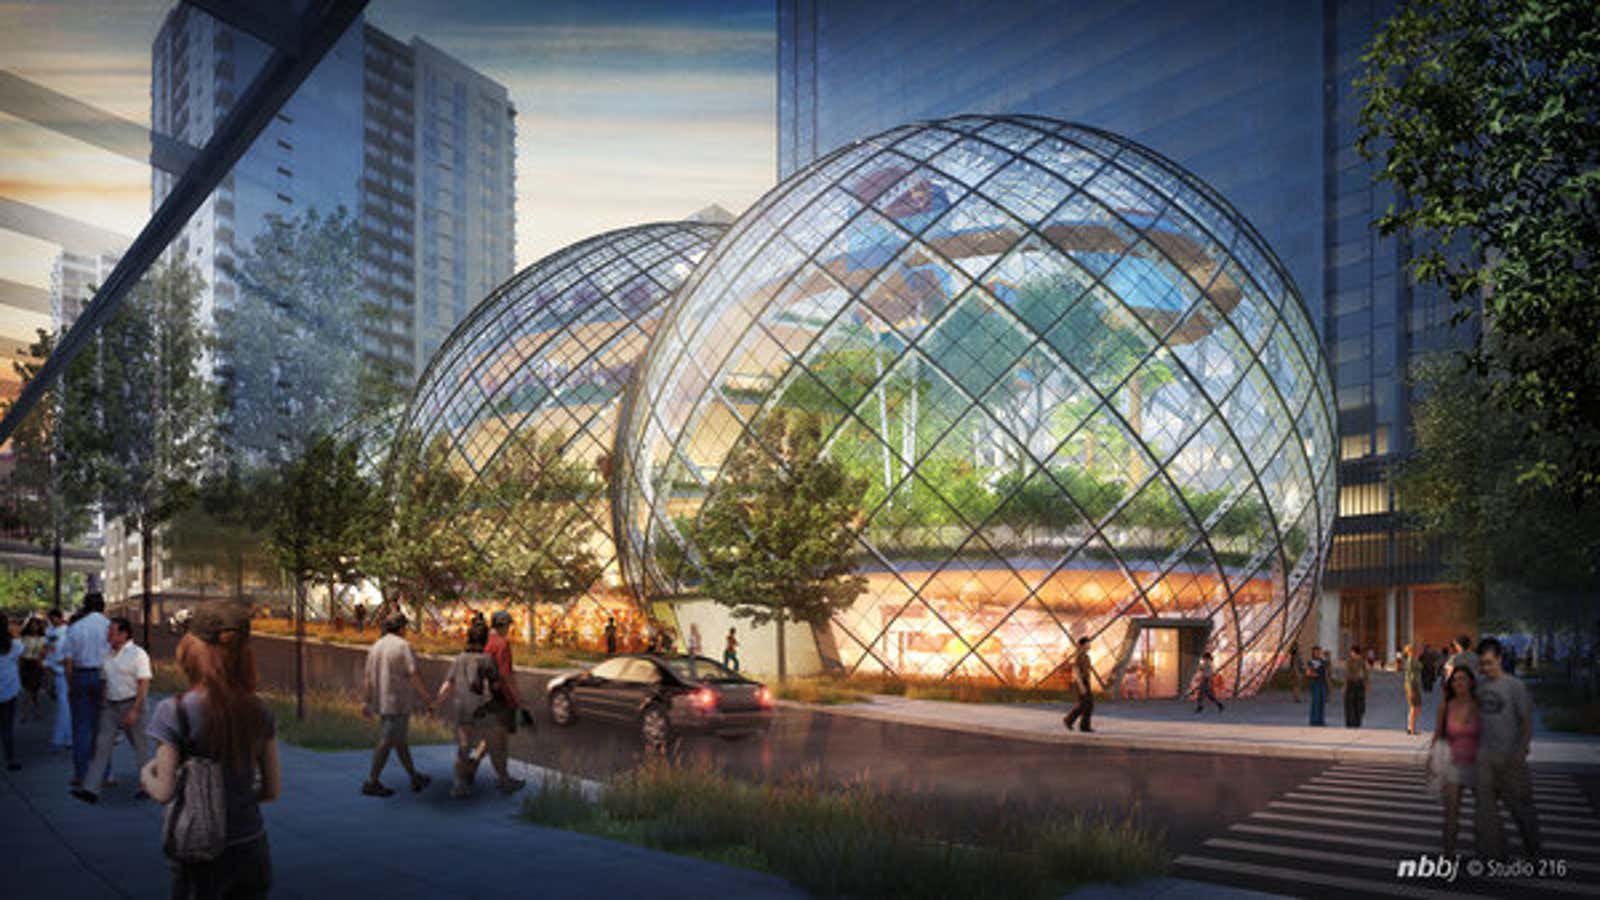 Amazon’s new corporate headquarters will be an Elysian utopia where nobody ever grows old or feels sadness.